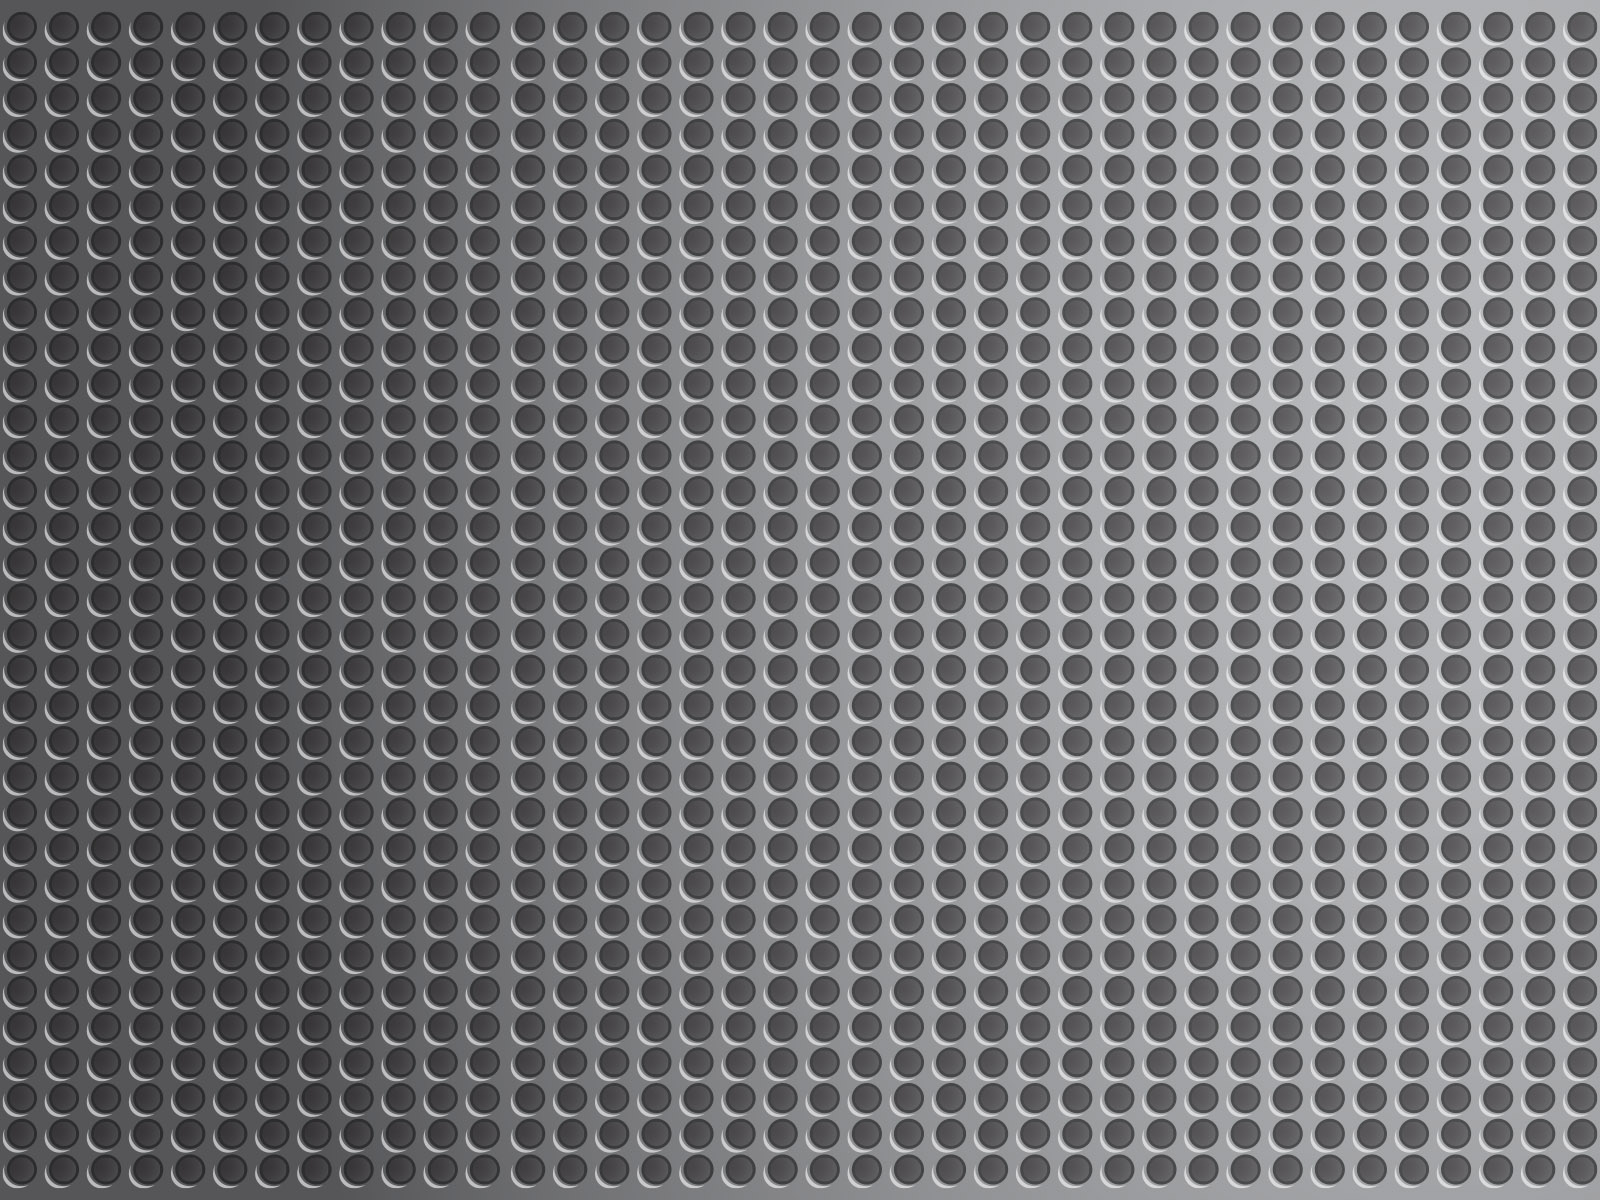 Metal Holes Pattern Backgrounds